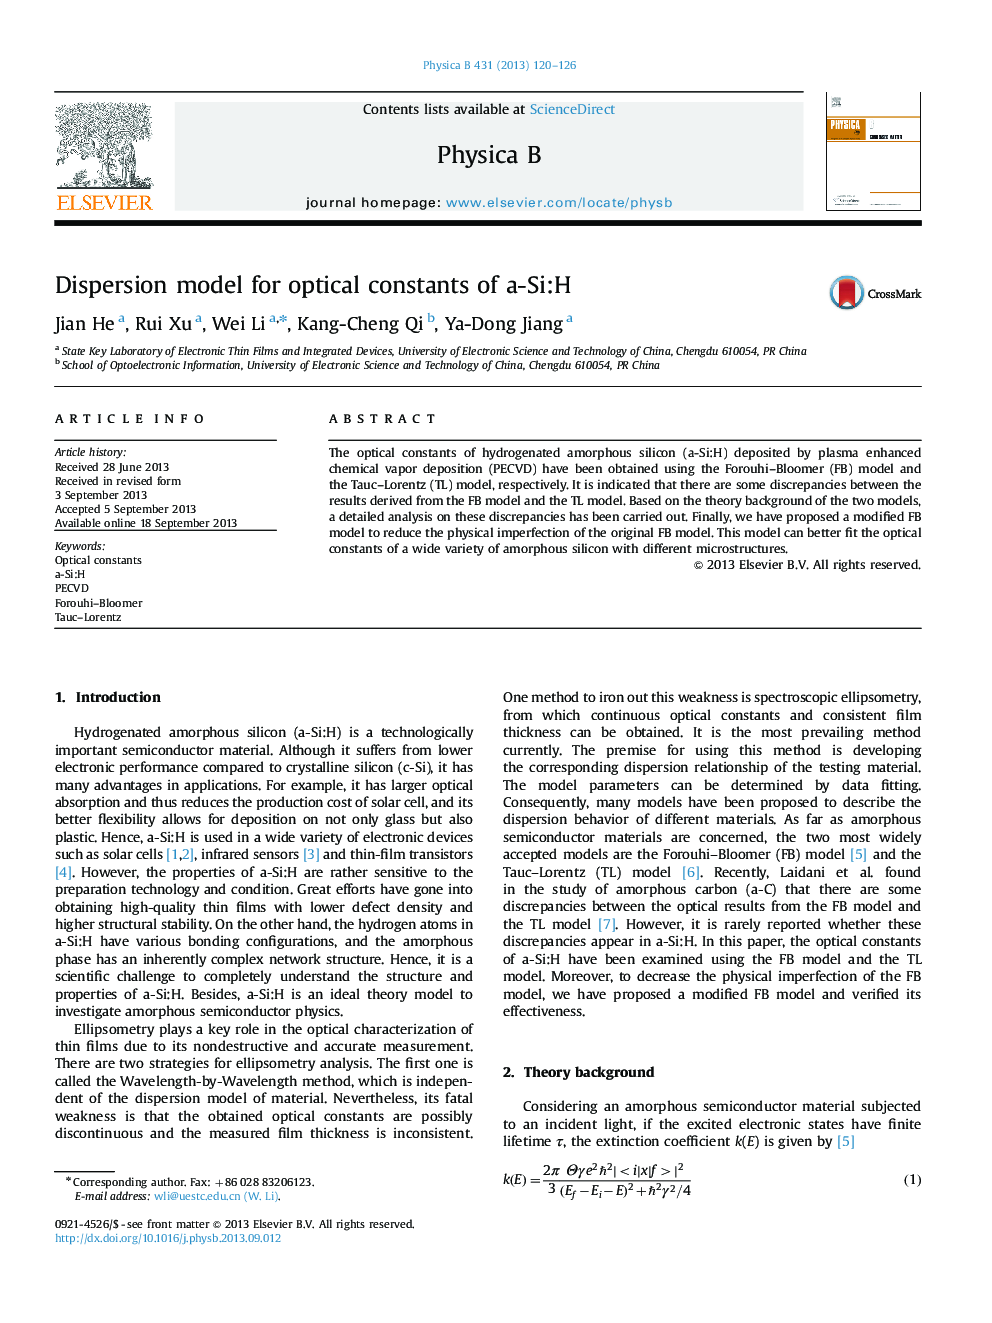 Dispersion model for optical constants of a-Si:H